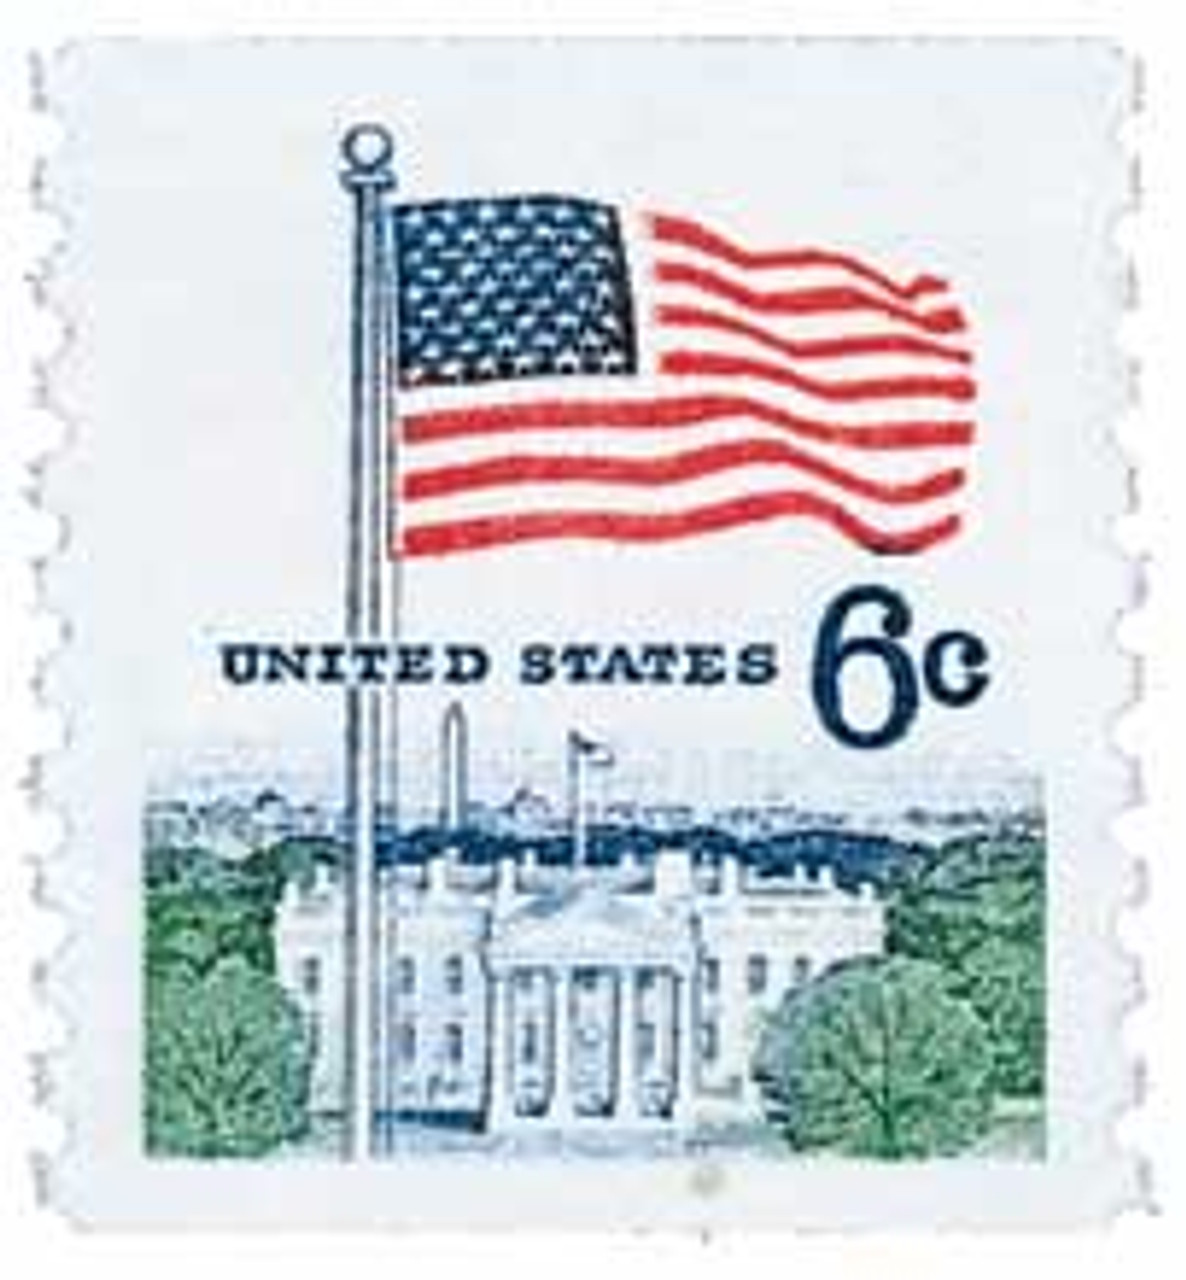 Postage Stamps for Crafting: 1963 5¢ Flag/White House, RED, WHITE